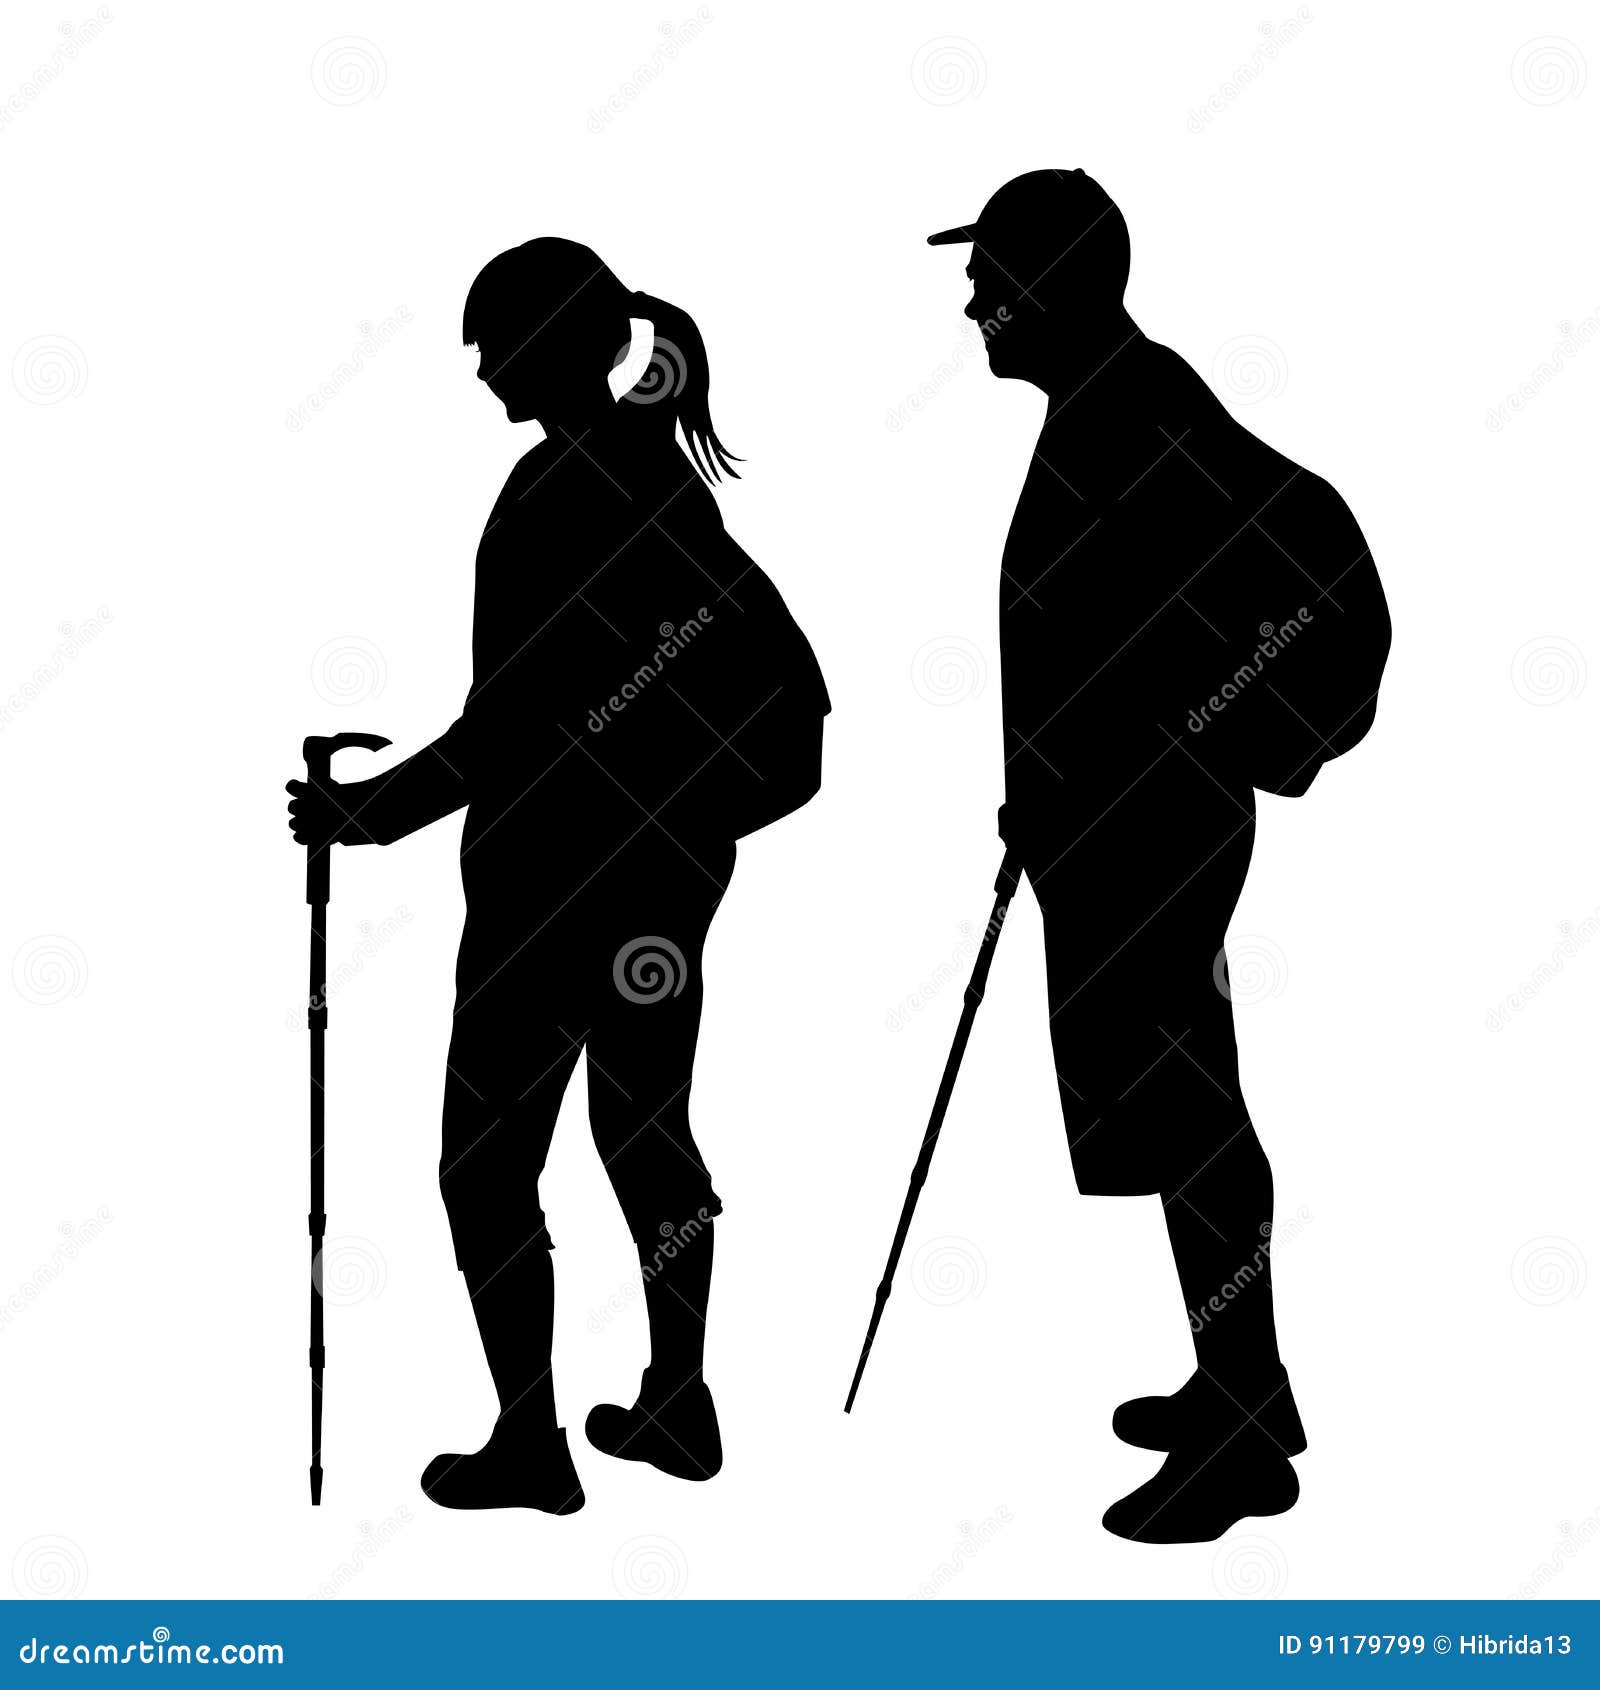 silhouettes of two hikers with backpacks